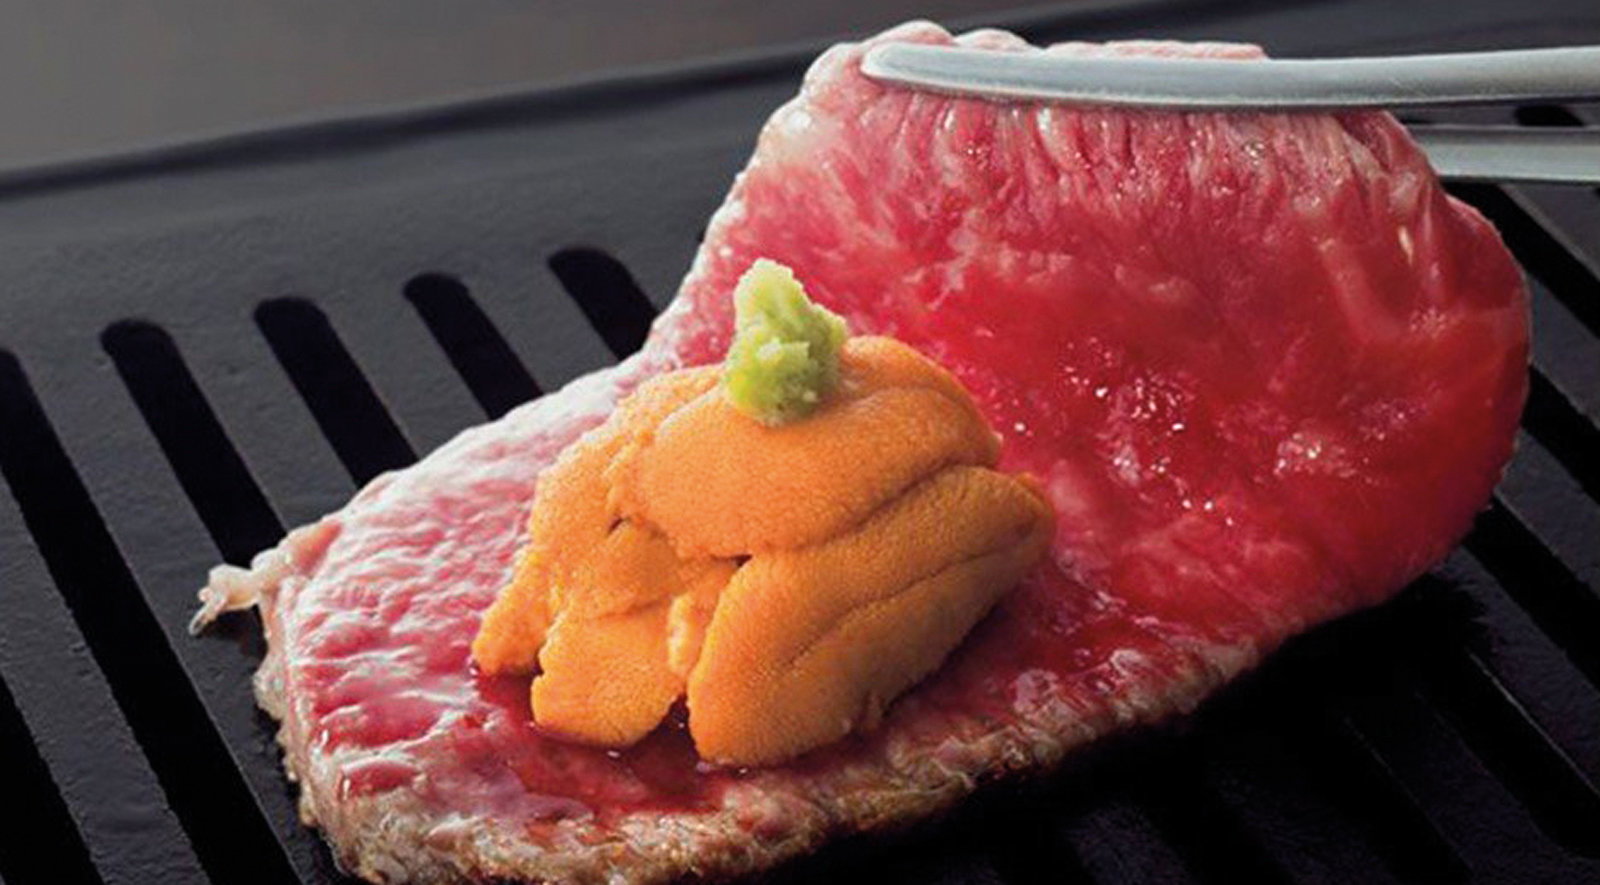 Uniku is a combination of uni and niku where fresh uni is wrapped in raw or cooked wahyu or served on top of wagyu sushi